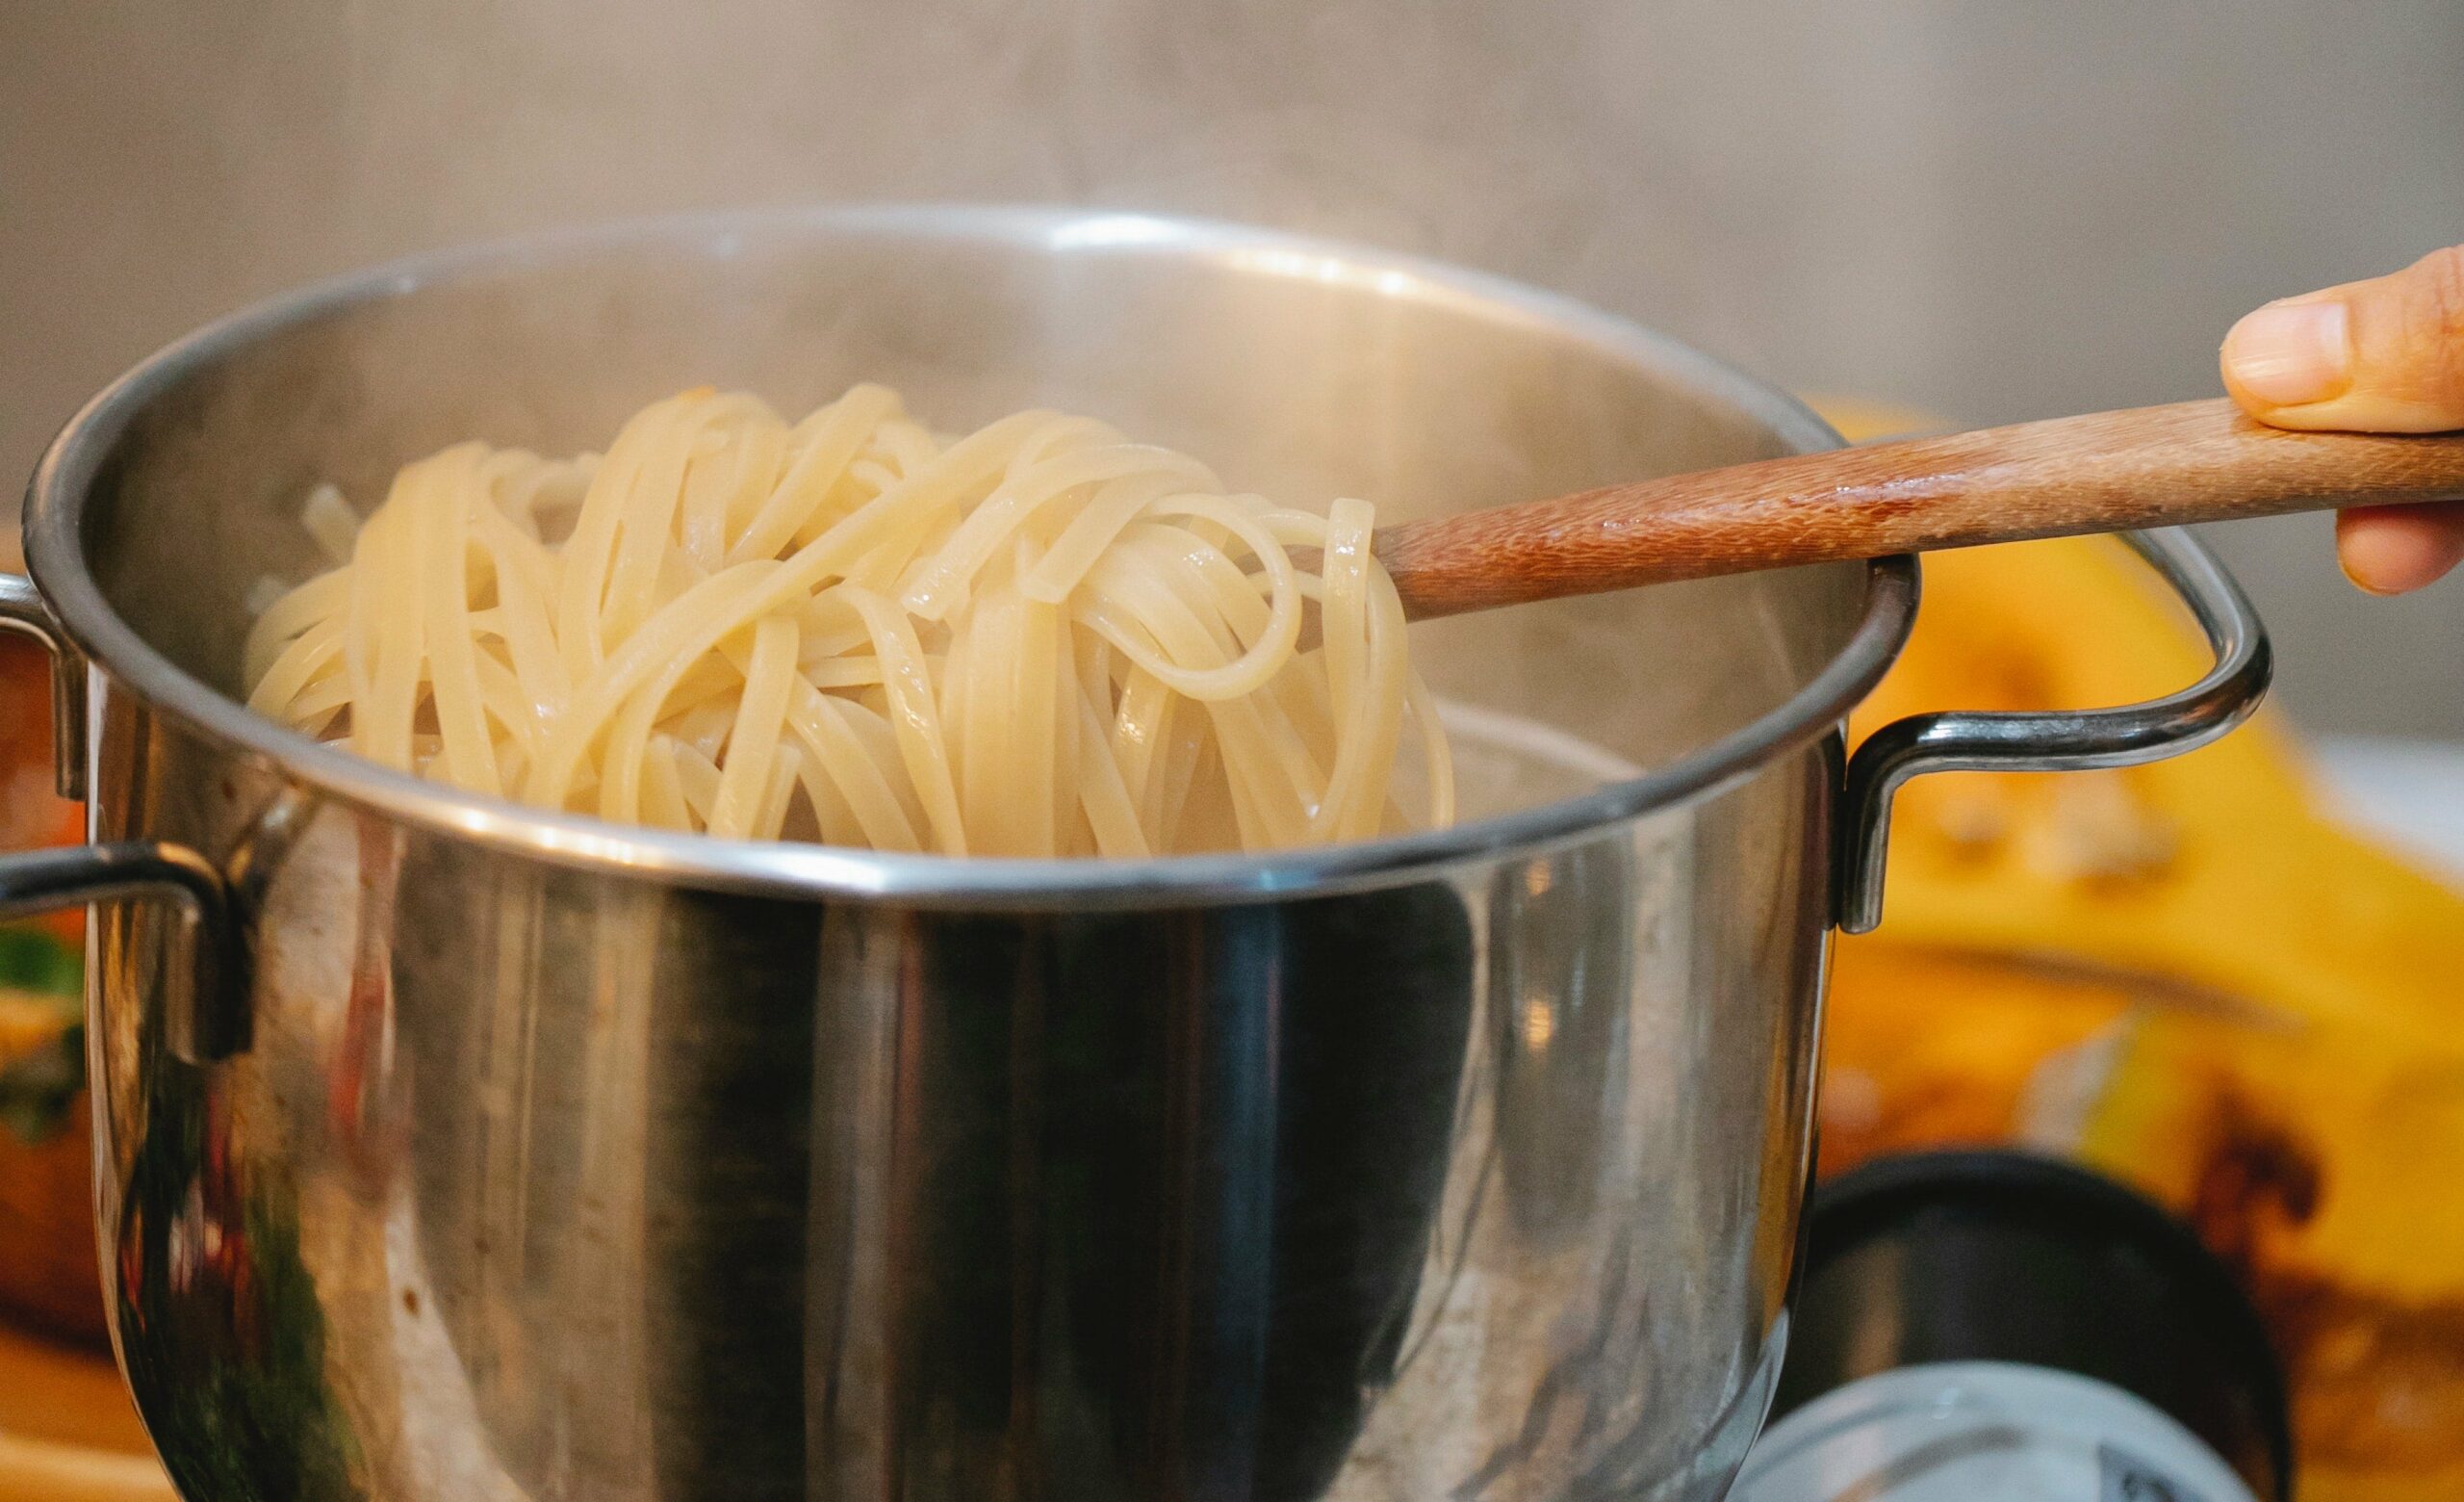 Effortless Family Dinner with One-Pot Country Spaghetti